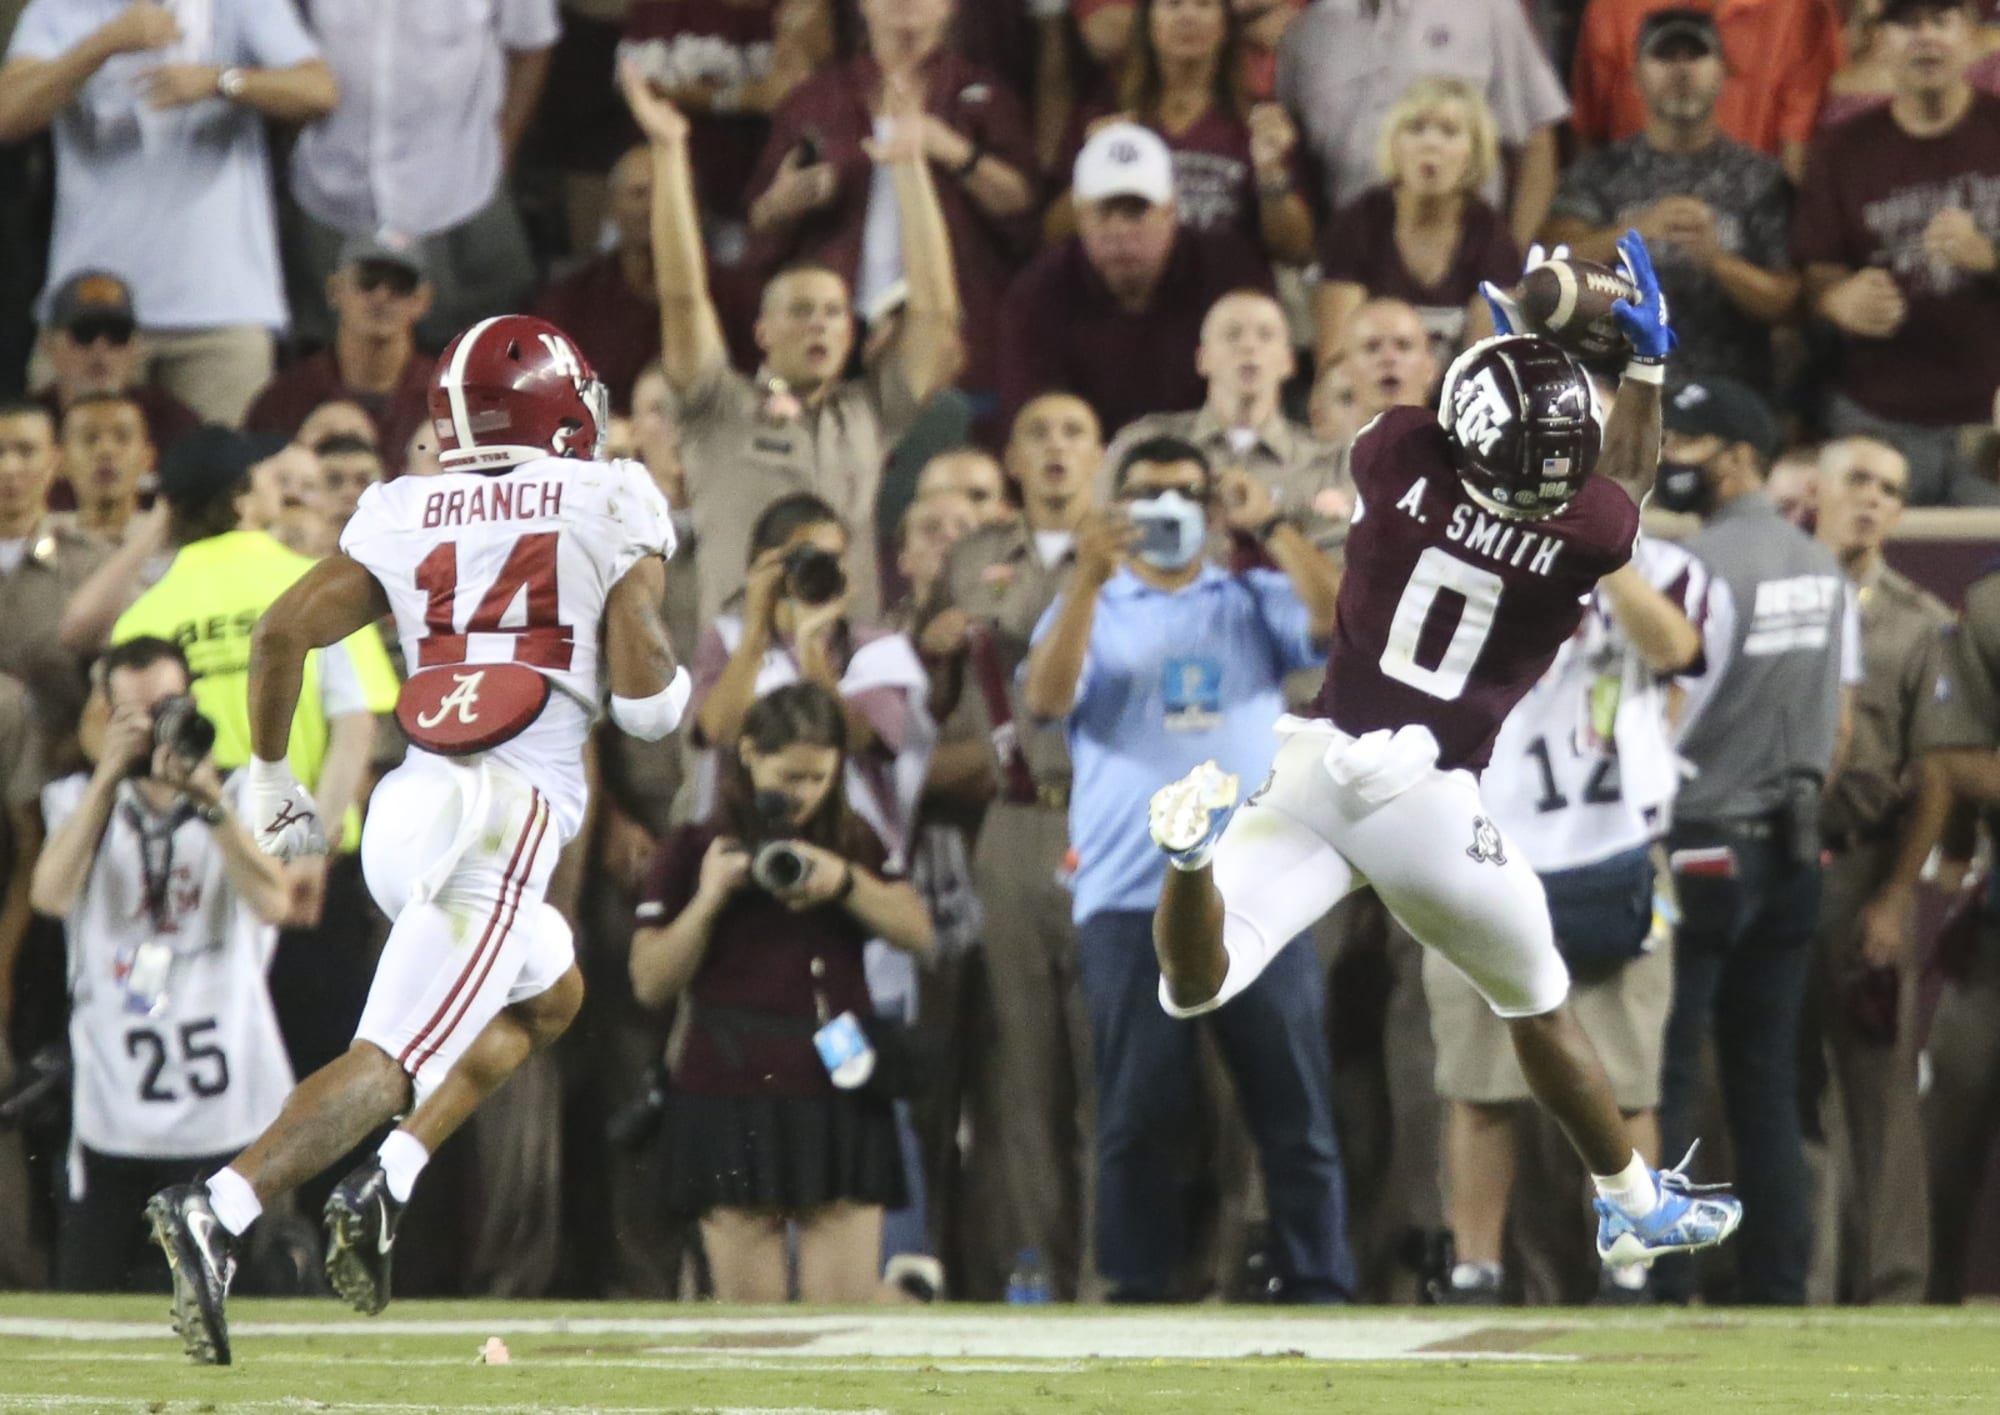 Texas A&M Football: 3 Takeaways from Infuriatingly Close Loss to Bama -  Page 3